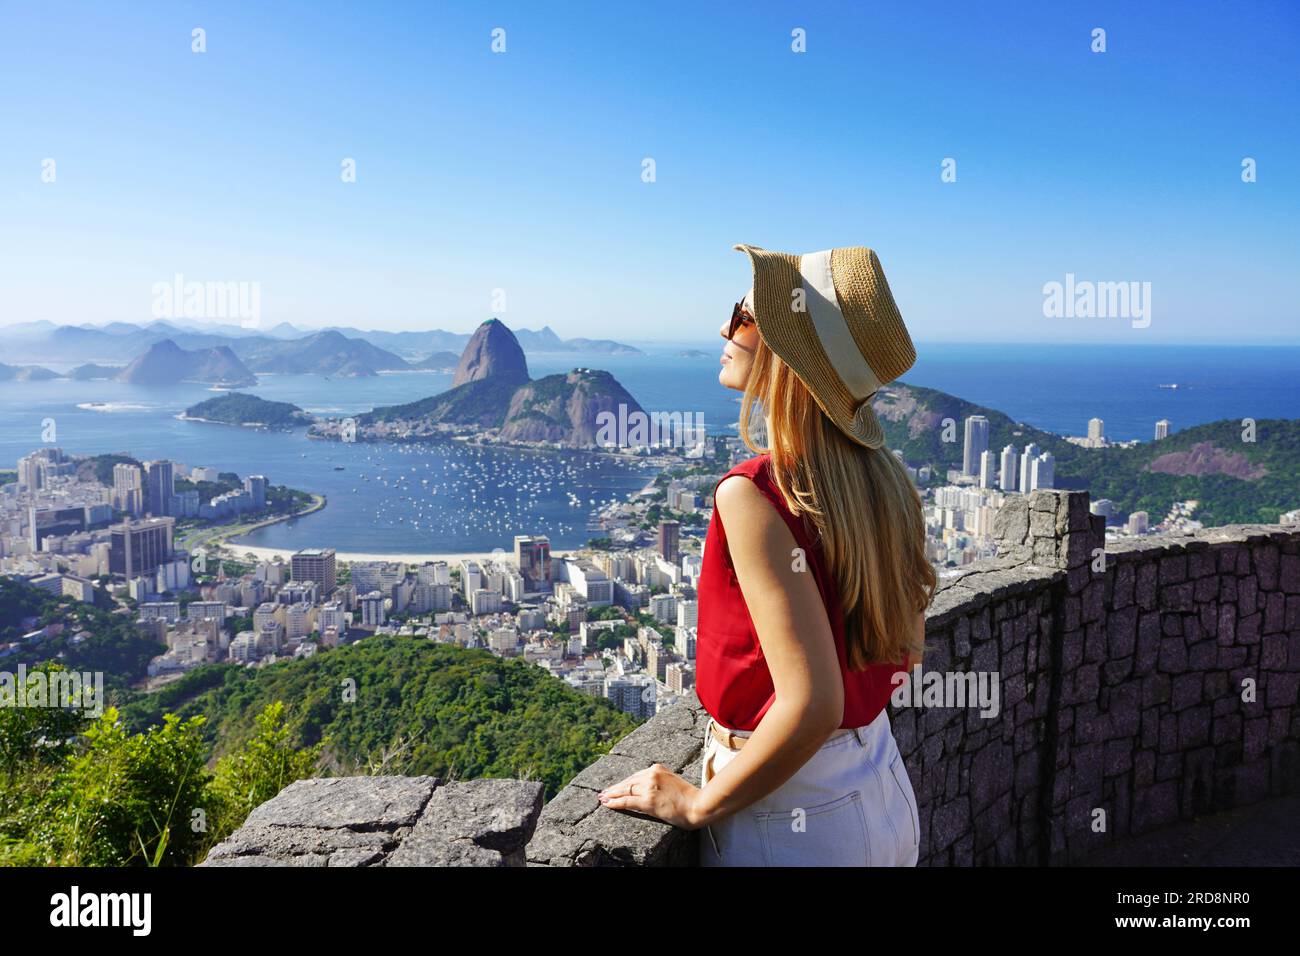 Fashion tourist woman on terrace in Rio de Janeiro with the famous Guanabara bay and the cityscape of Rio de Janerio, Brazil Stock Photo